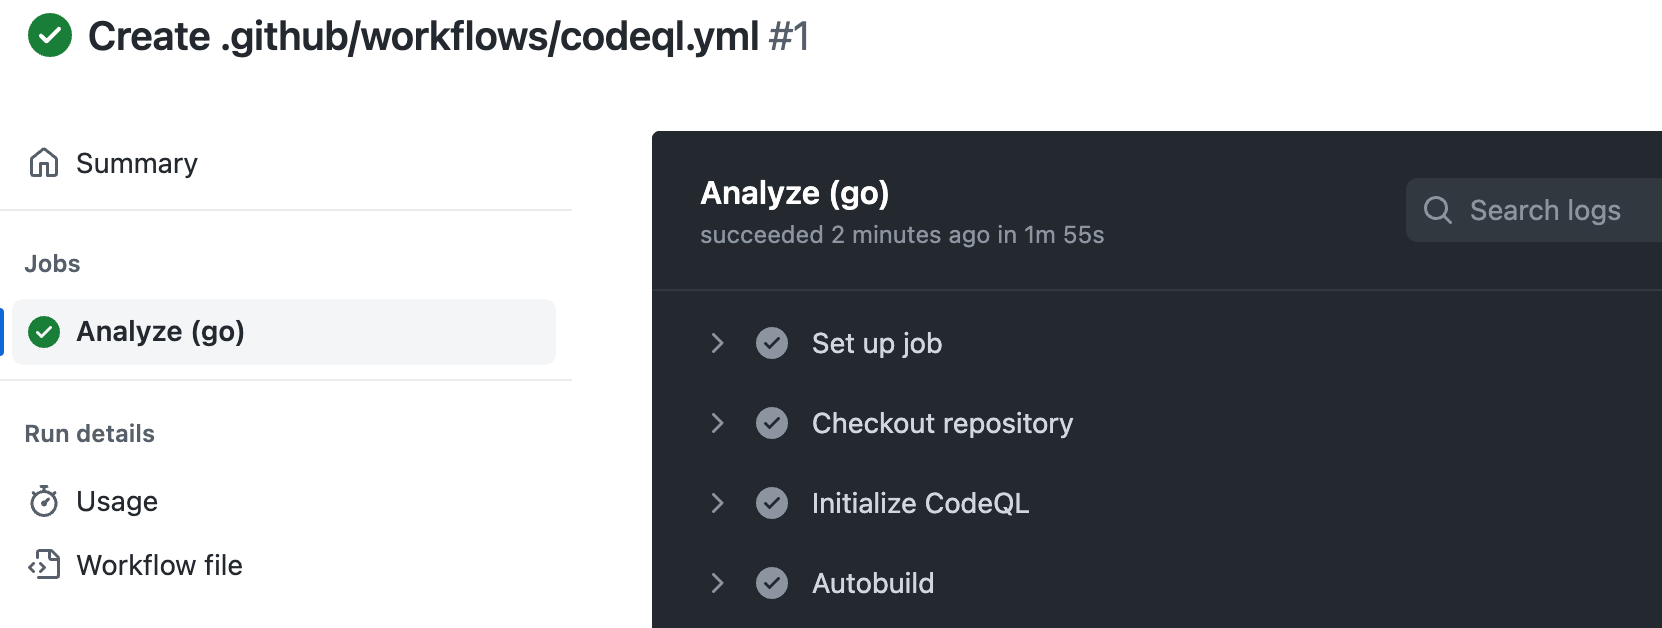 Screenshot of the log output for the "Analyze (go)" job. In the left sidebar, under the "Jobs" heading, "Analyze (go)" is listed.